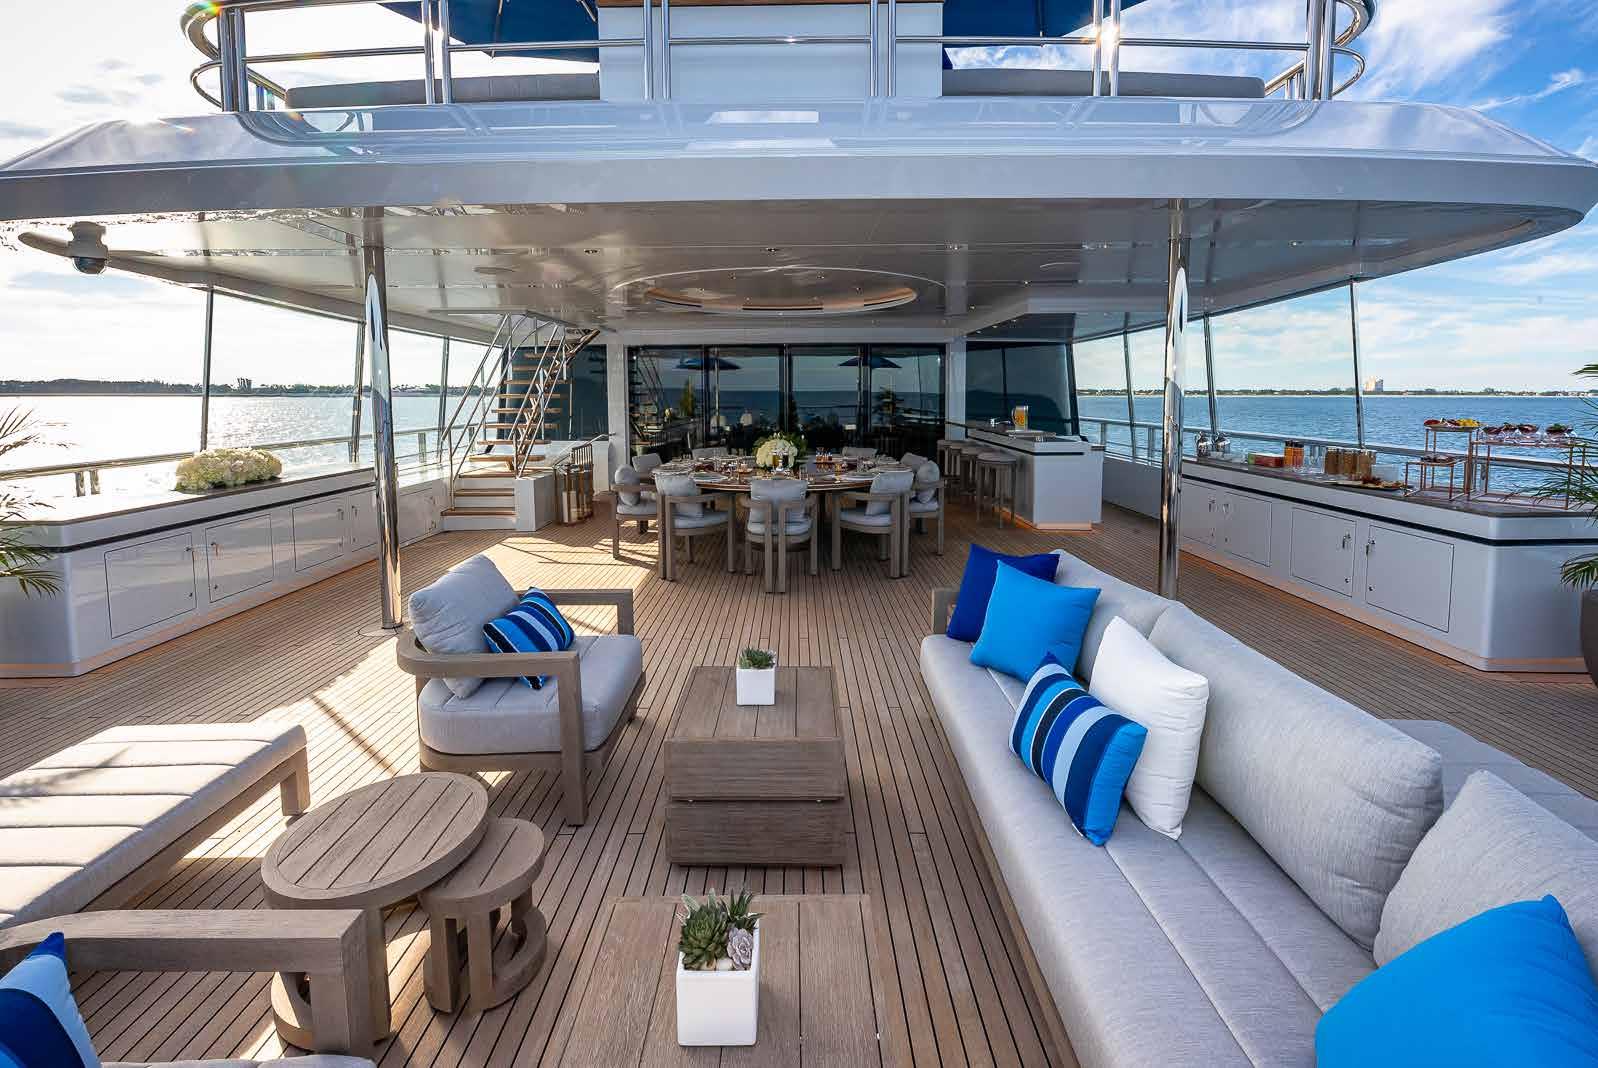 Aft Deck Relaxation Area